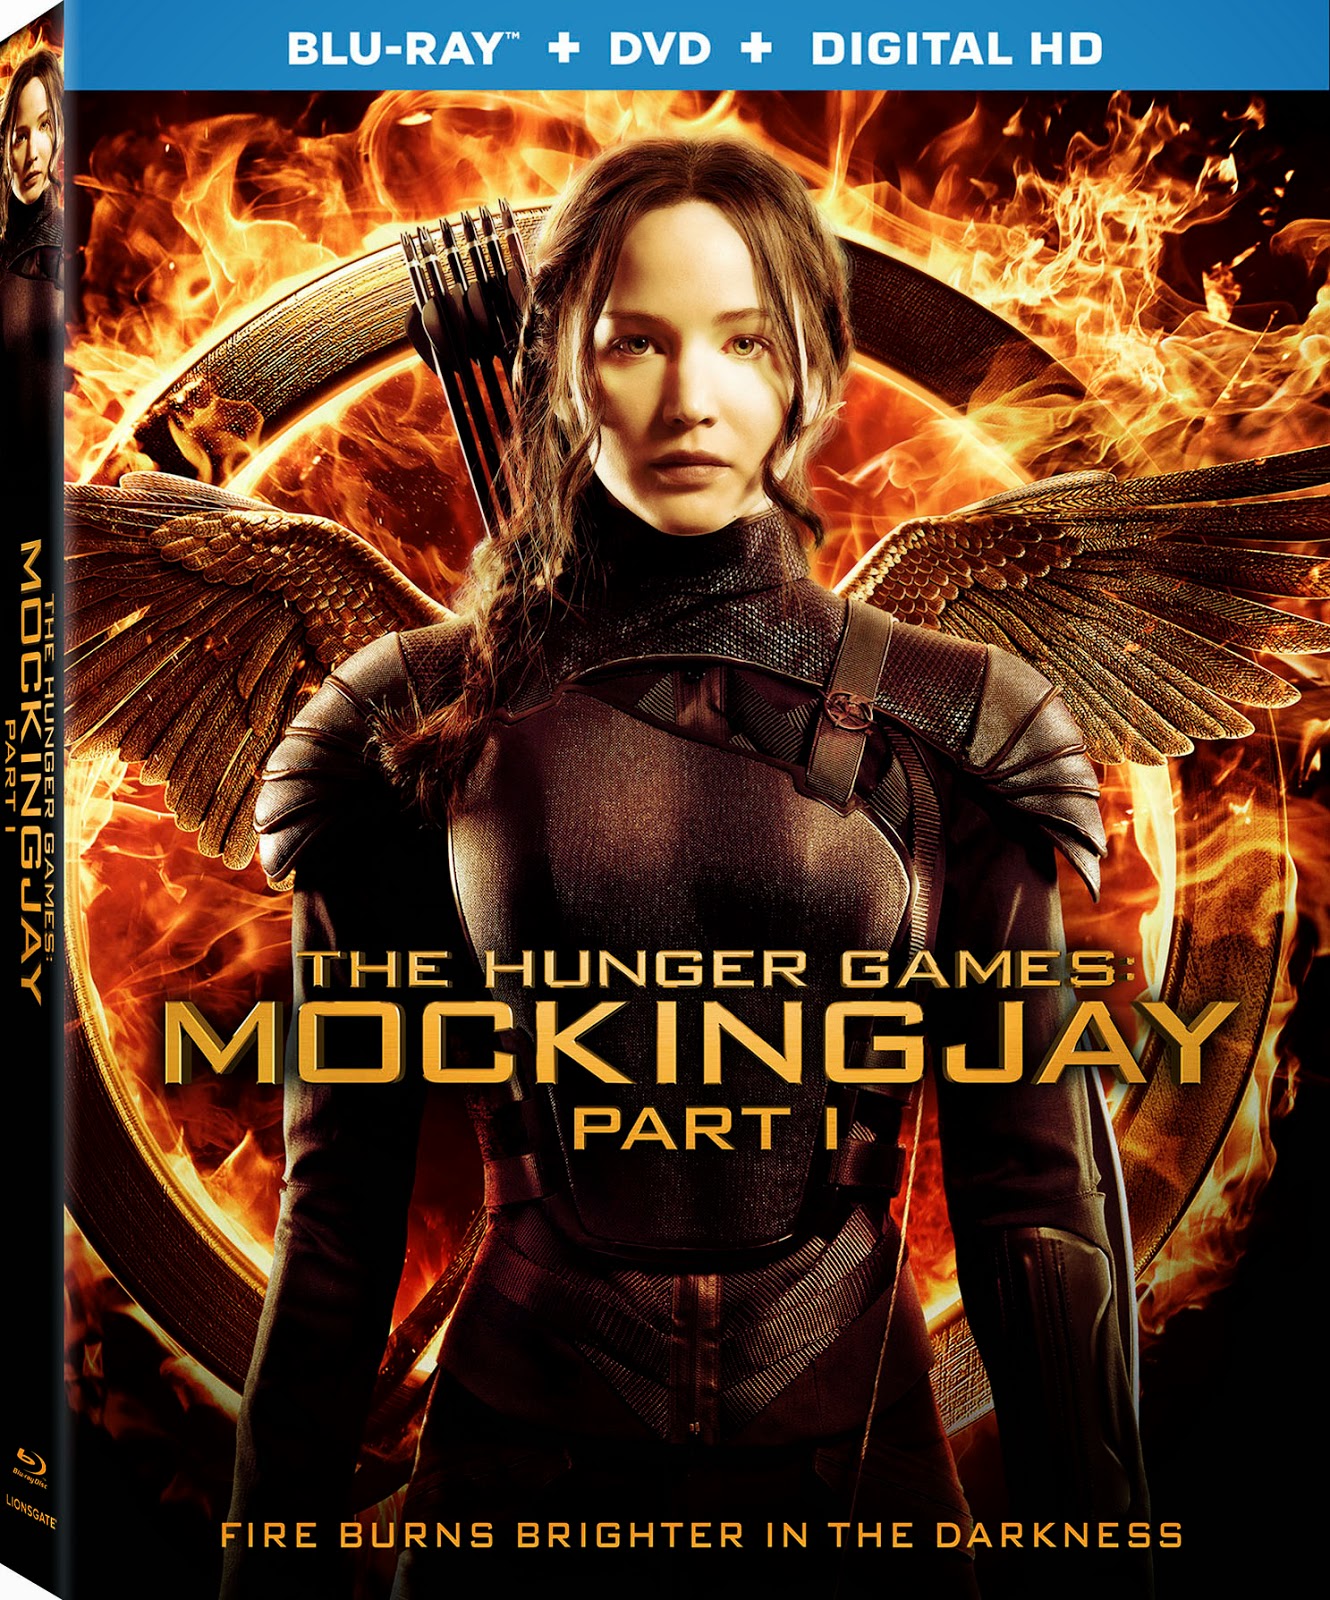 Film vs. Book: New The Hunger Games: Mockingjay poster is 